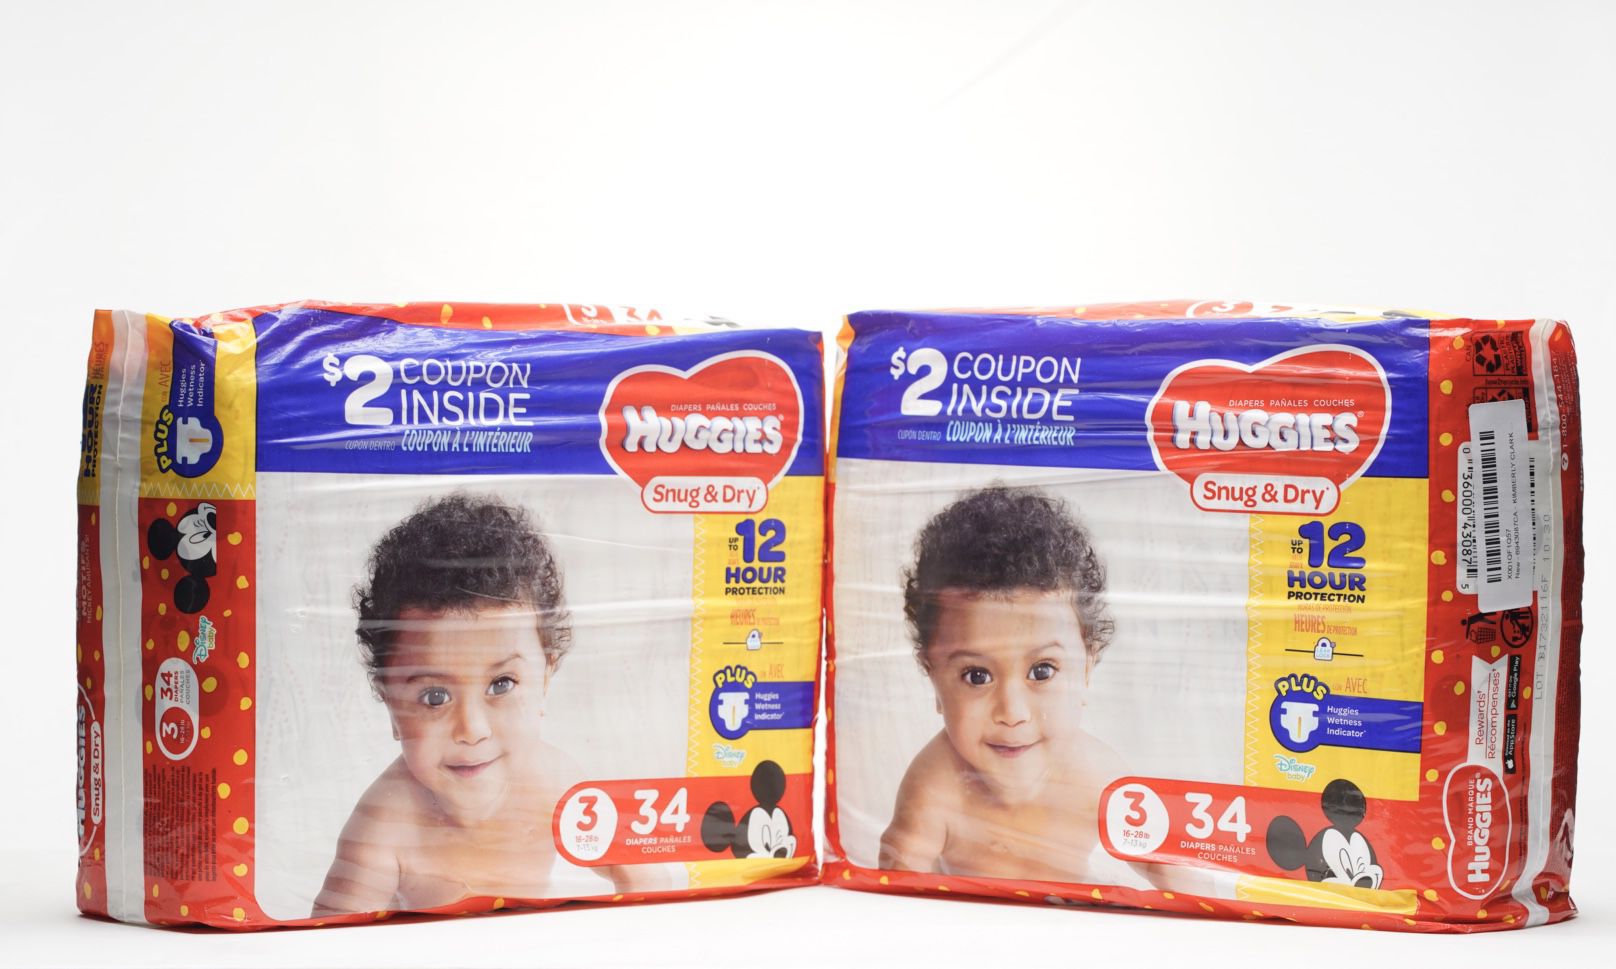 Huggies Diapers #3  16-28 Pounds  2packs 68 